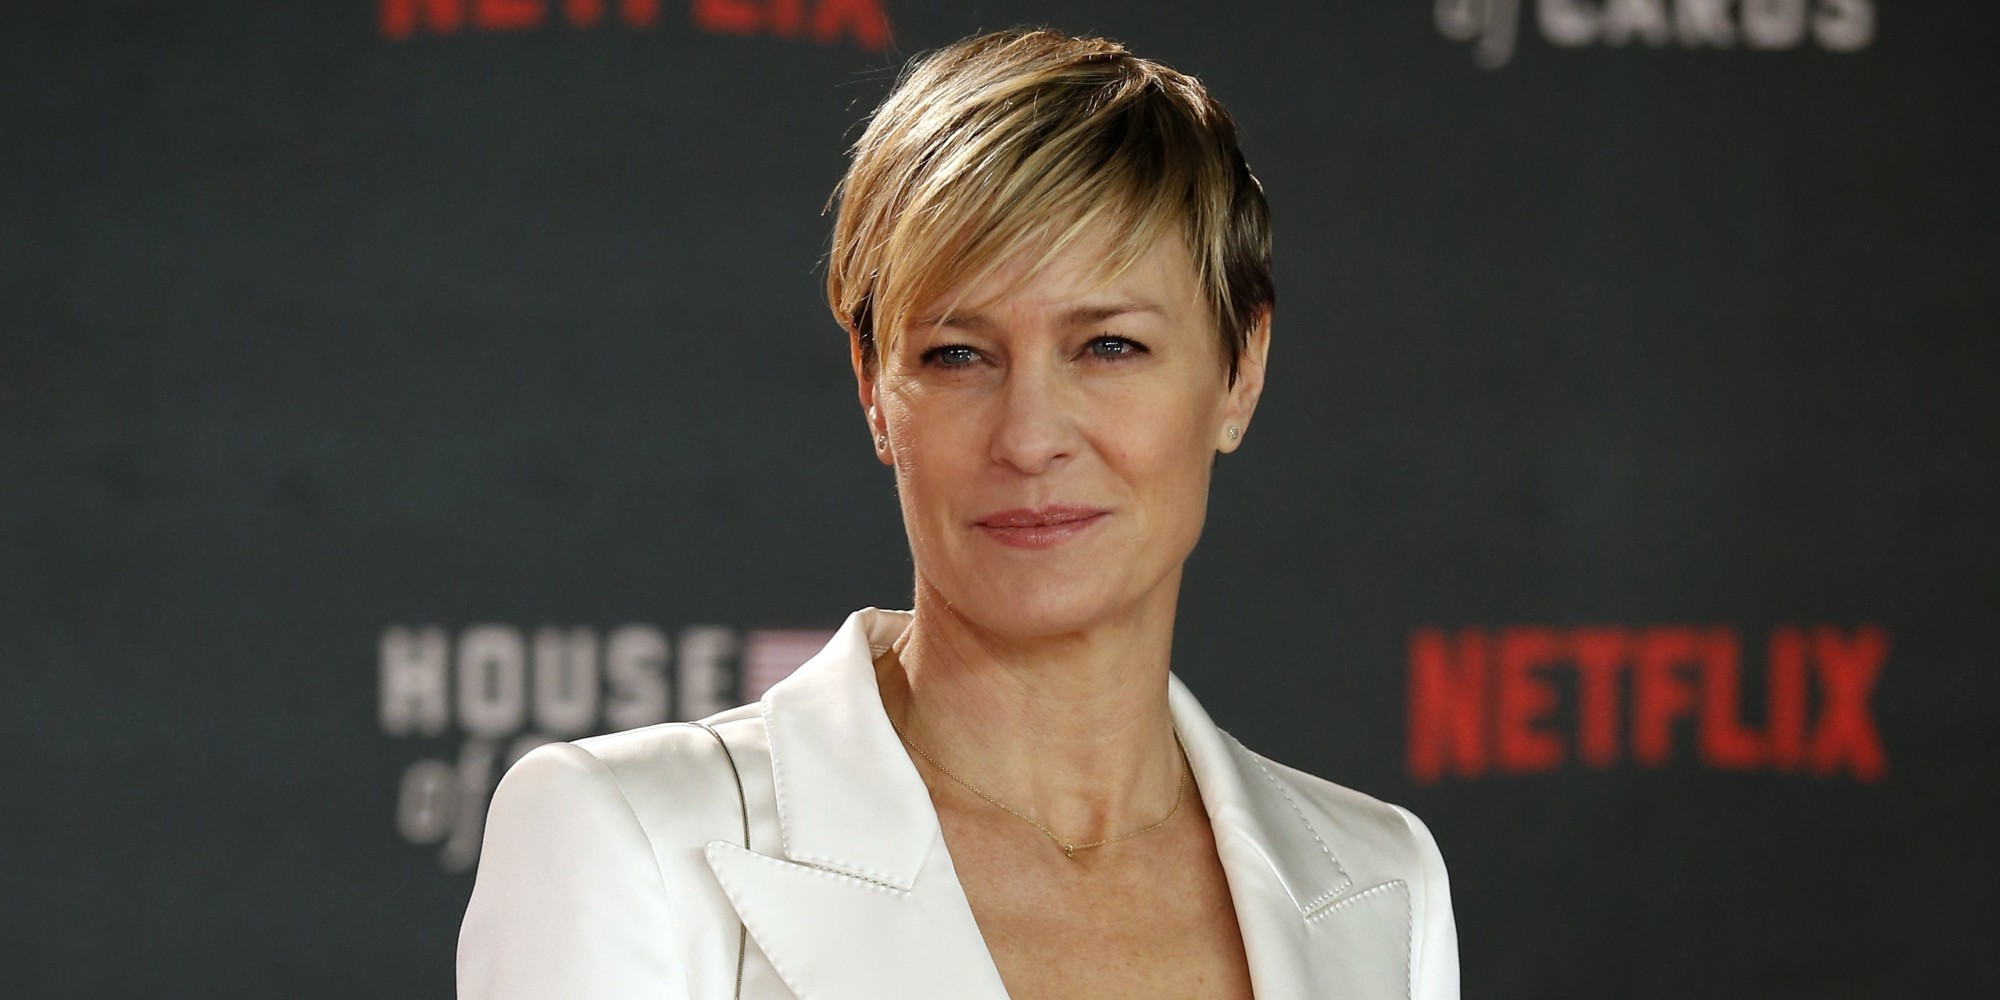 US actress Robin Wright poses for photographers on the red carpet ahead of the world premiere of the television series 'House of Cards - Season 3 Episode 1' in London on February 26, 2015.  AFP PHOTO / JUSTIN TALLIS        (Photo credit should read JUSTIN TALLIS/AFP/Getty Images)